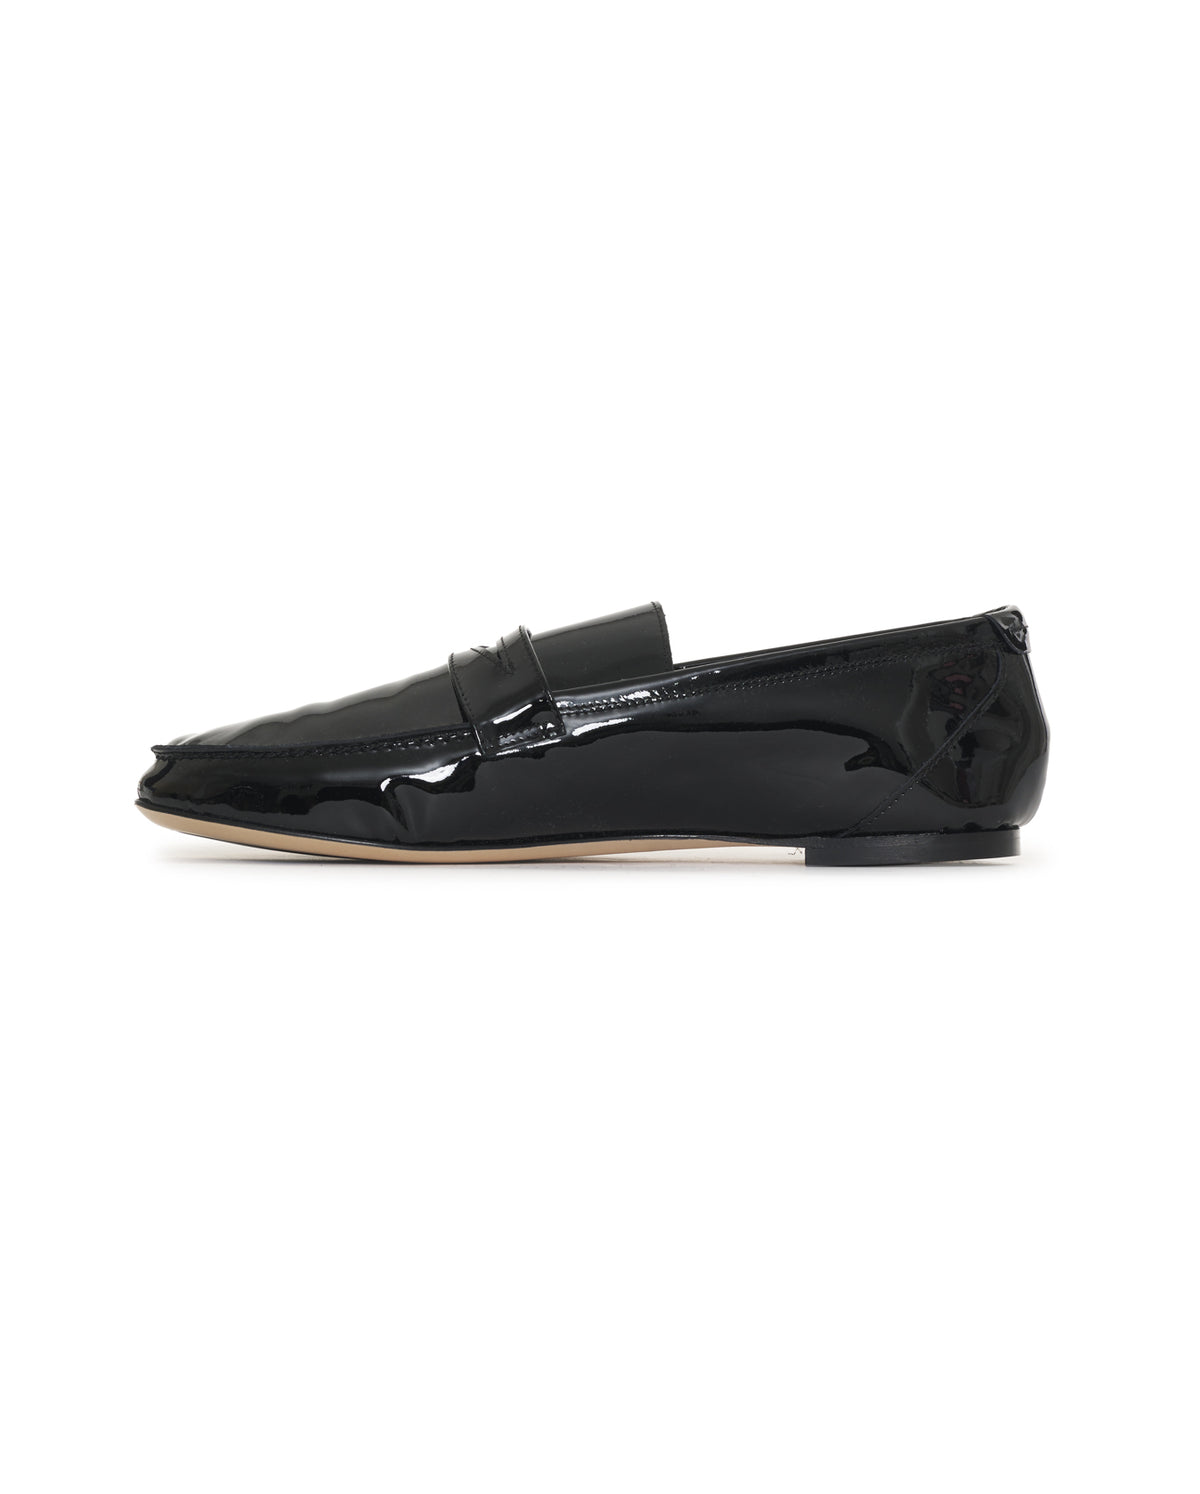 The Penny Loafer - Patent Black